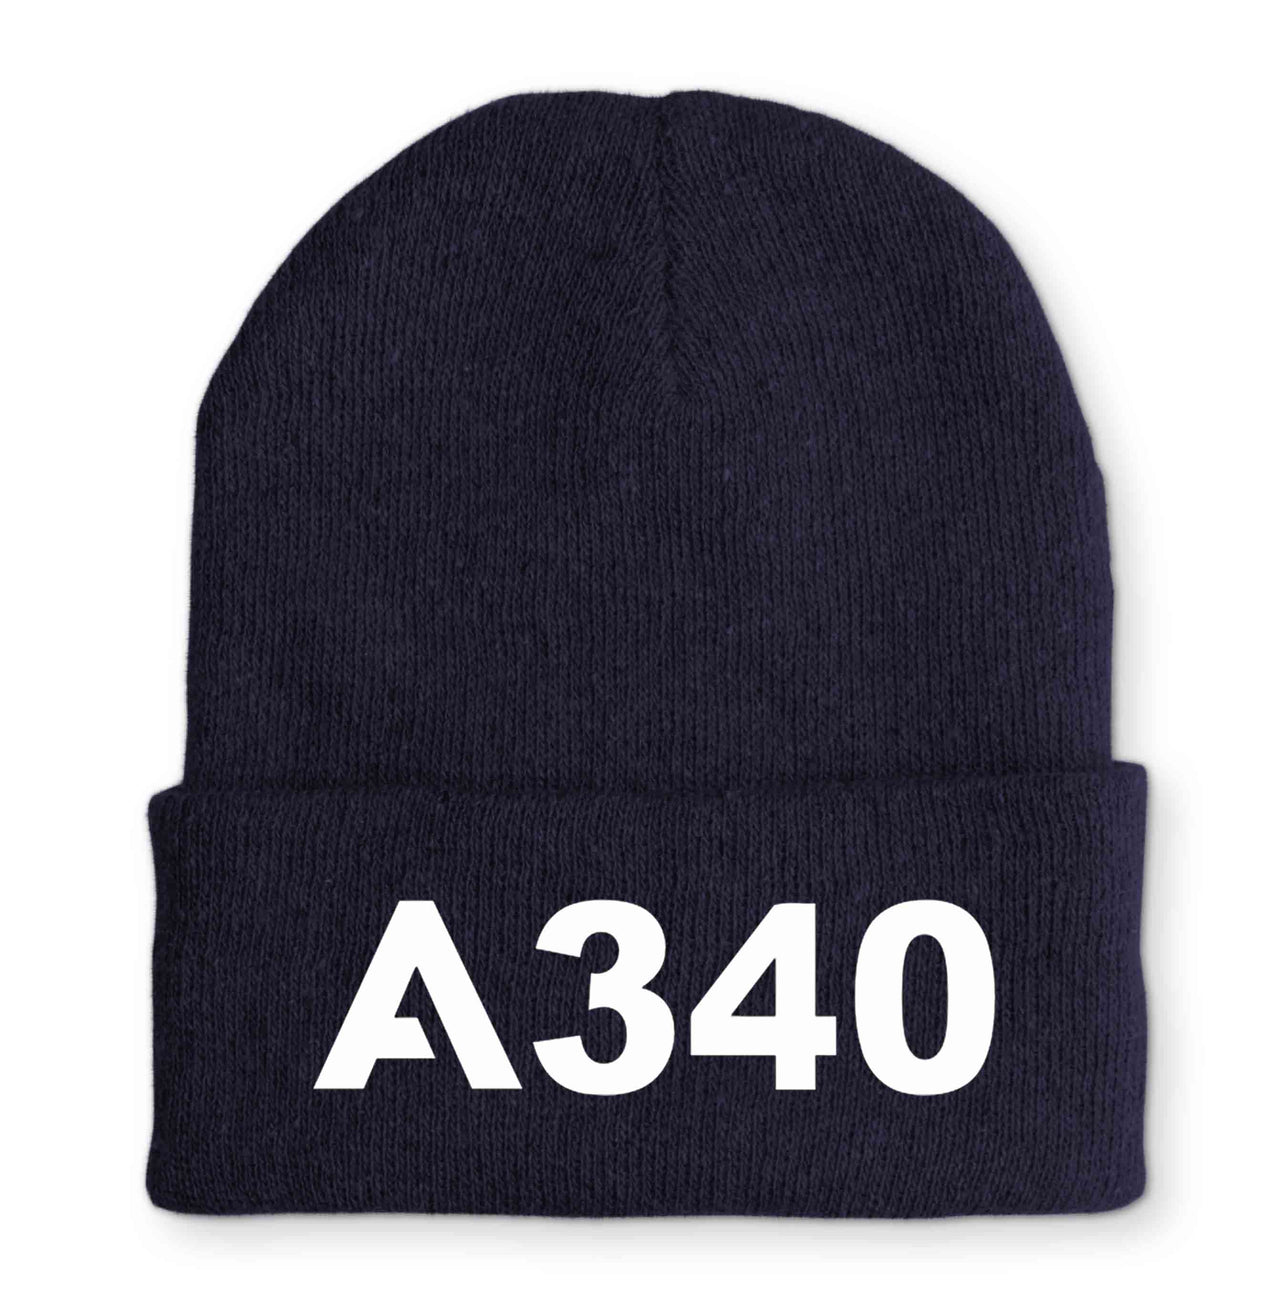 A340 Flat Text Embroidered Beanies